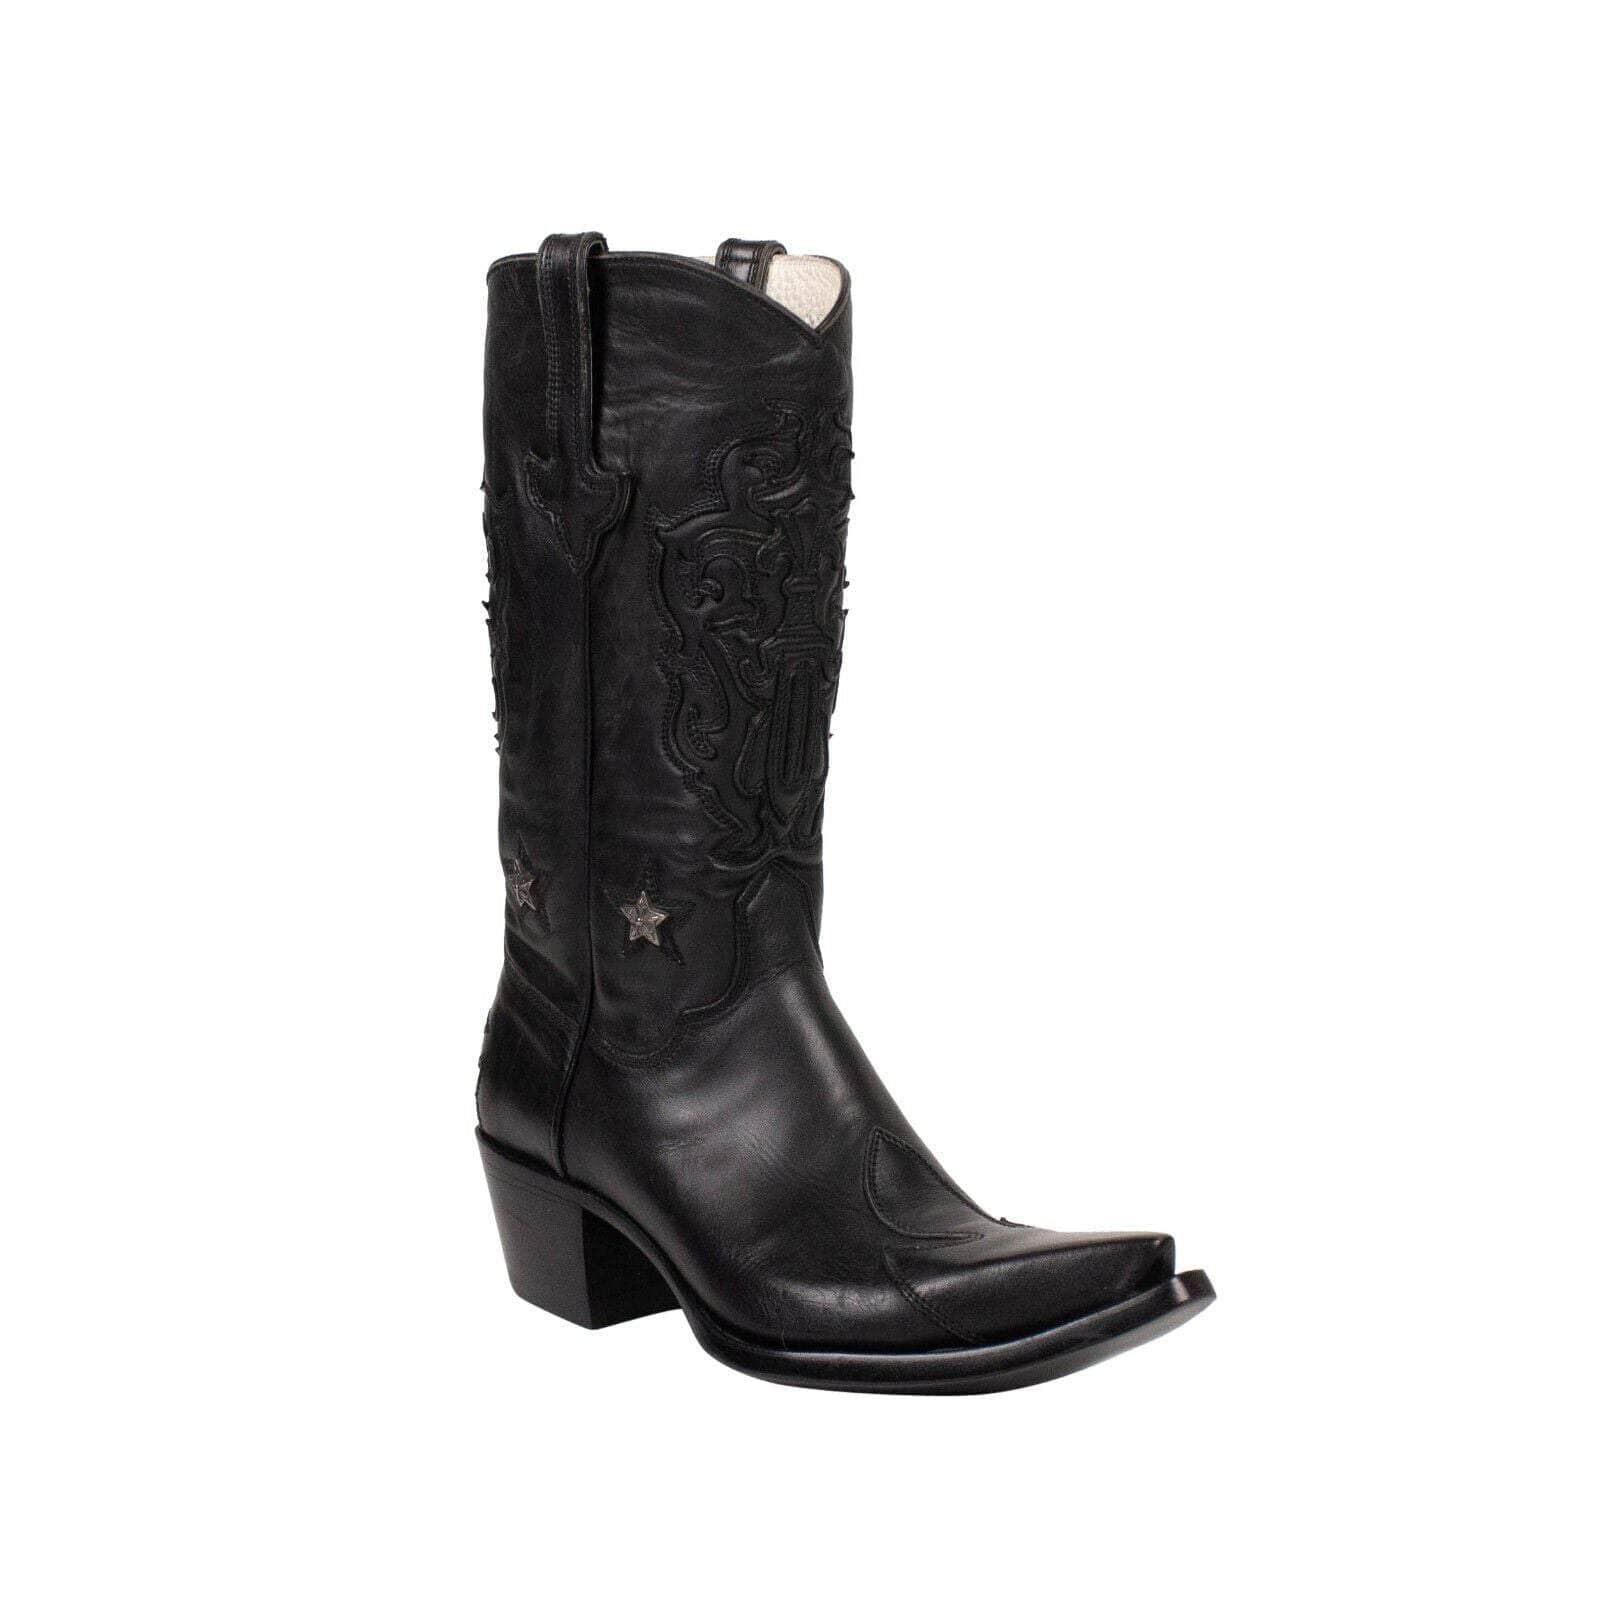 CHROME HEARTS Black Leather Western Cowboy Boots